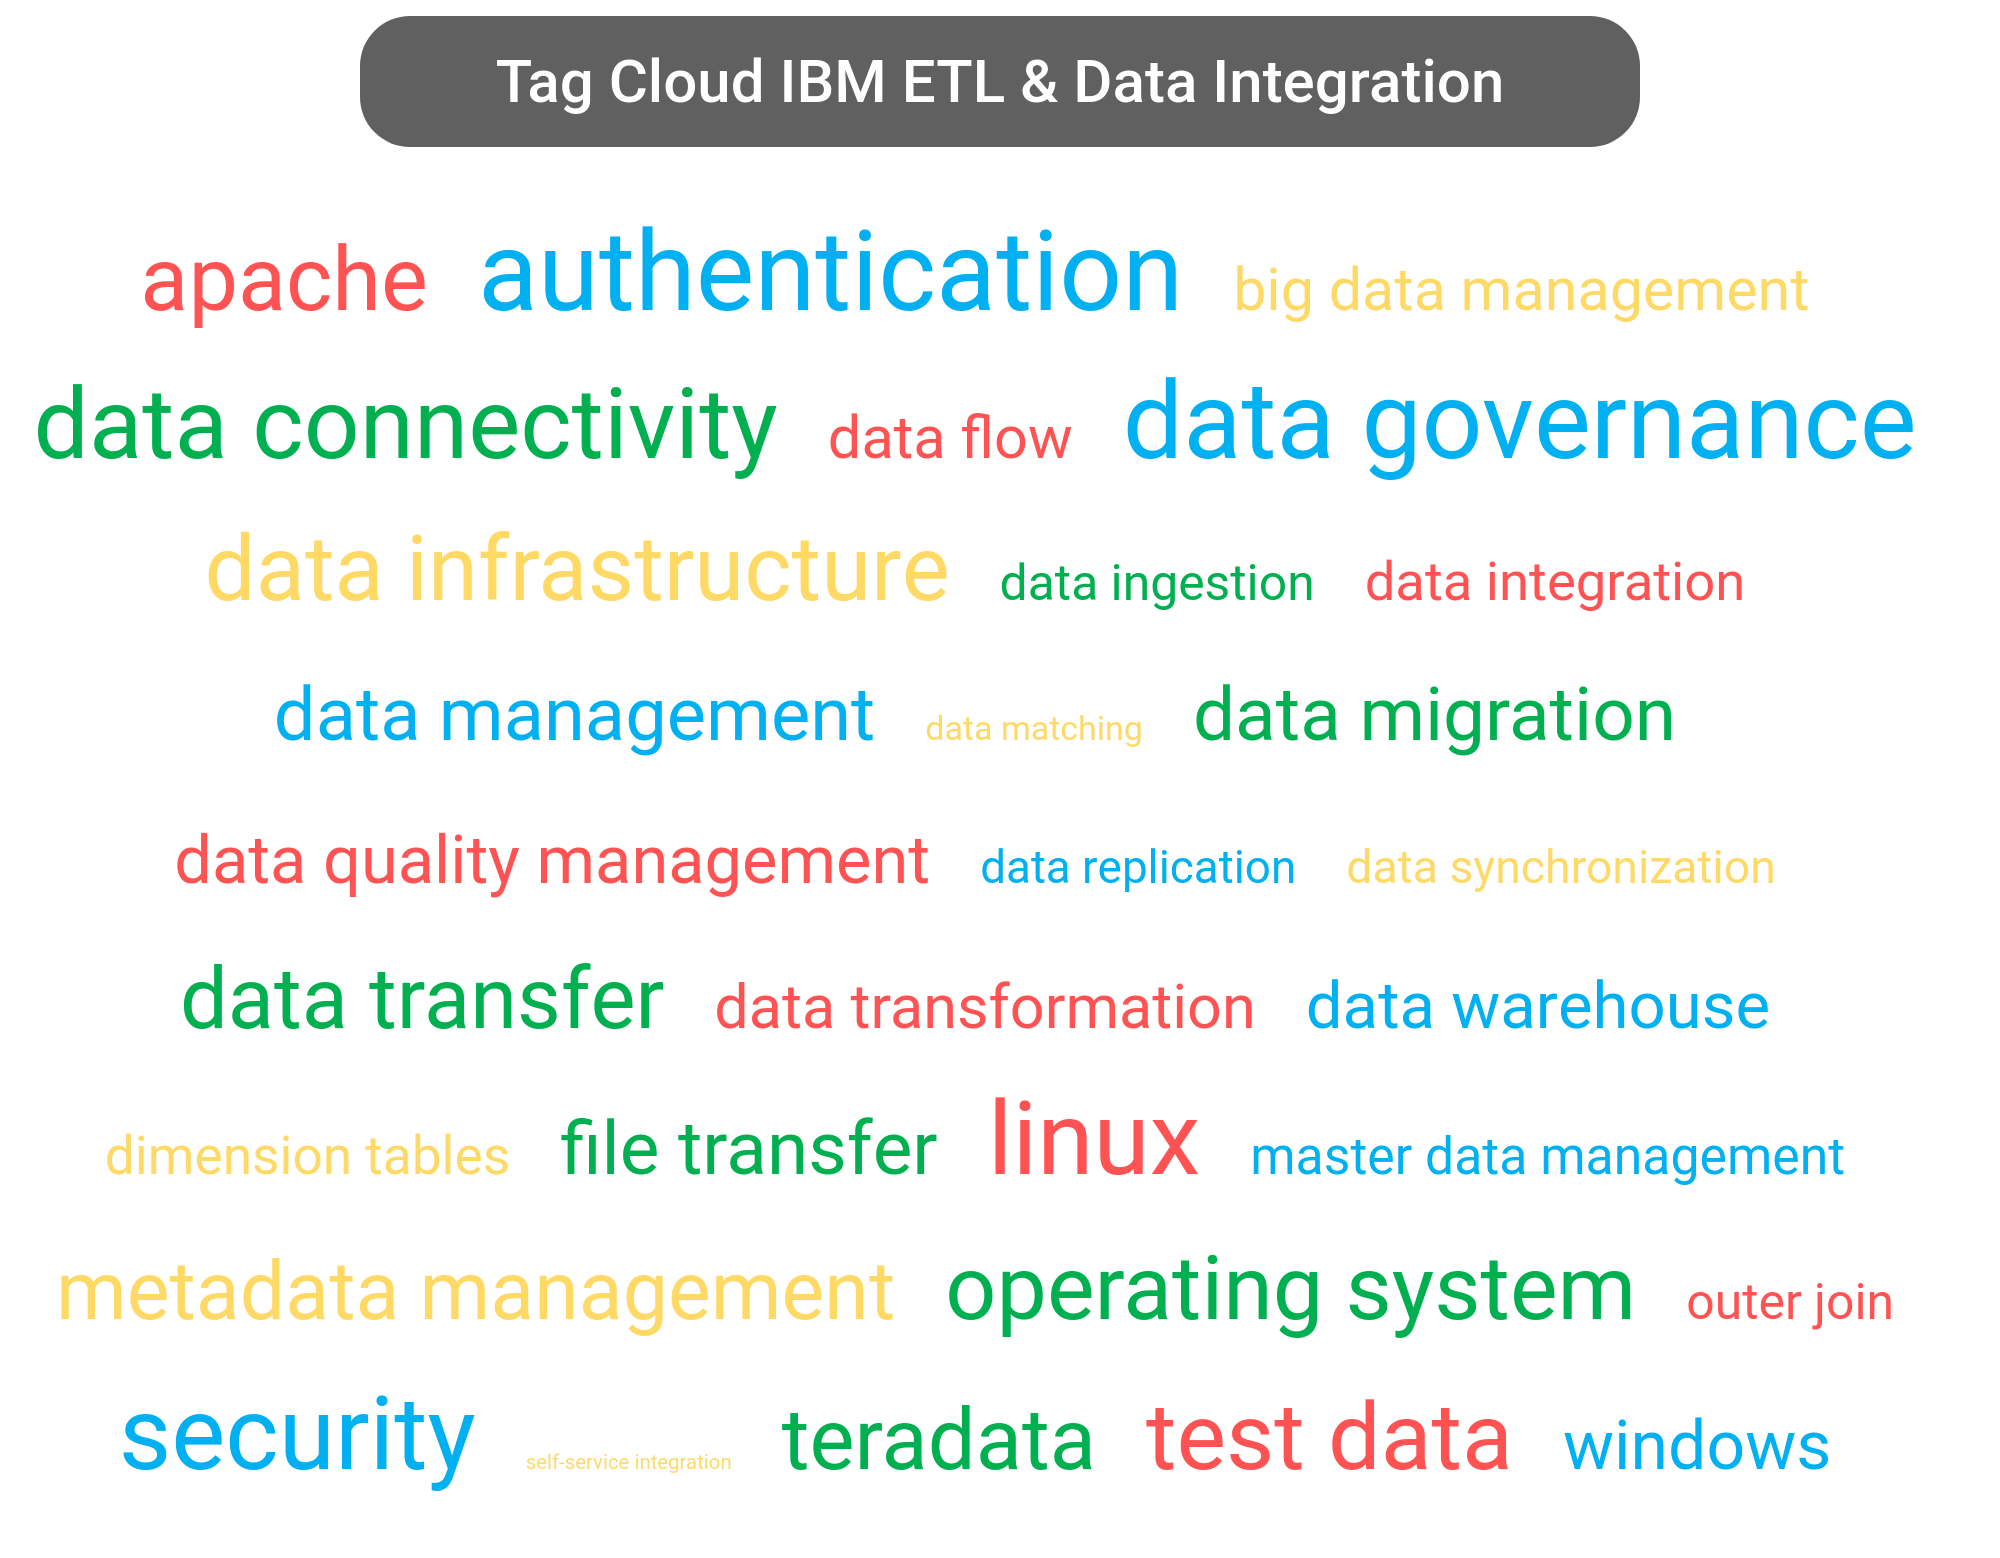 Tag cloud of the IBM Data Integration software.